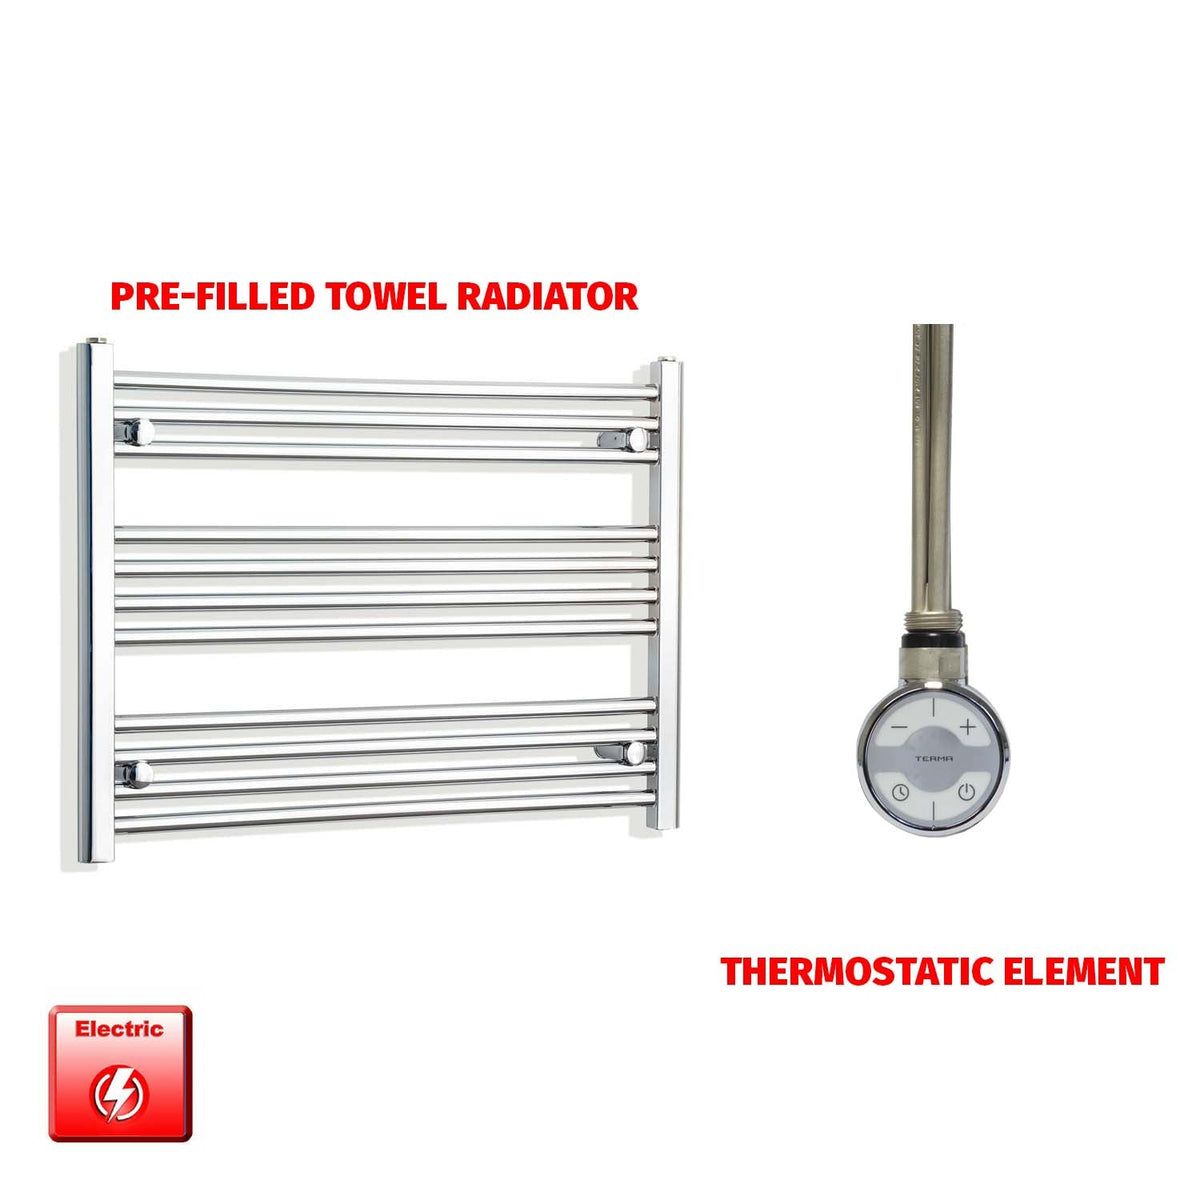 600 x 900 Pre-Filled Electric Heated Towel Radiator Straight Chrome MOA Thermostatic element no timer